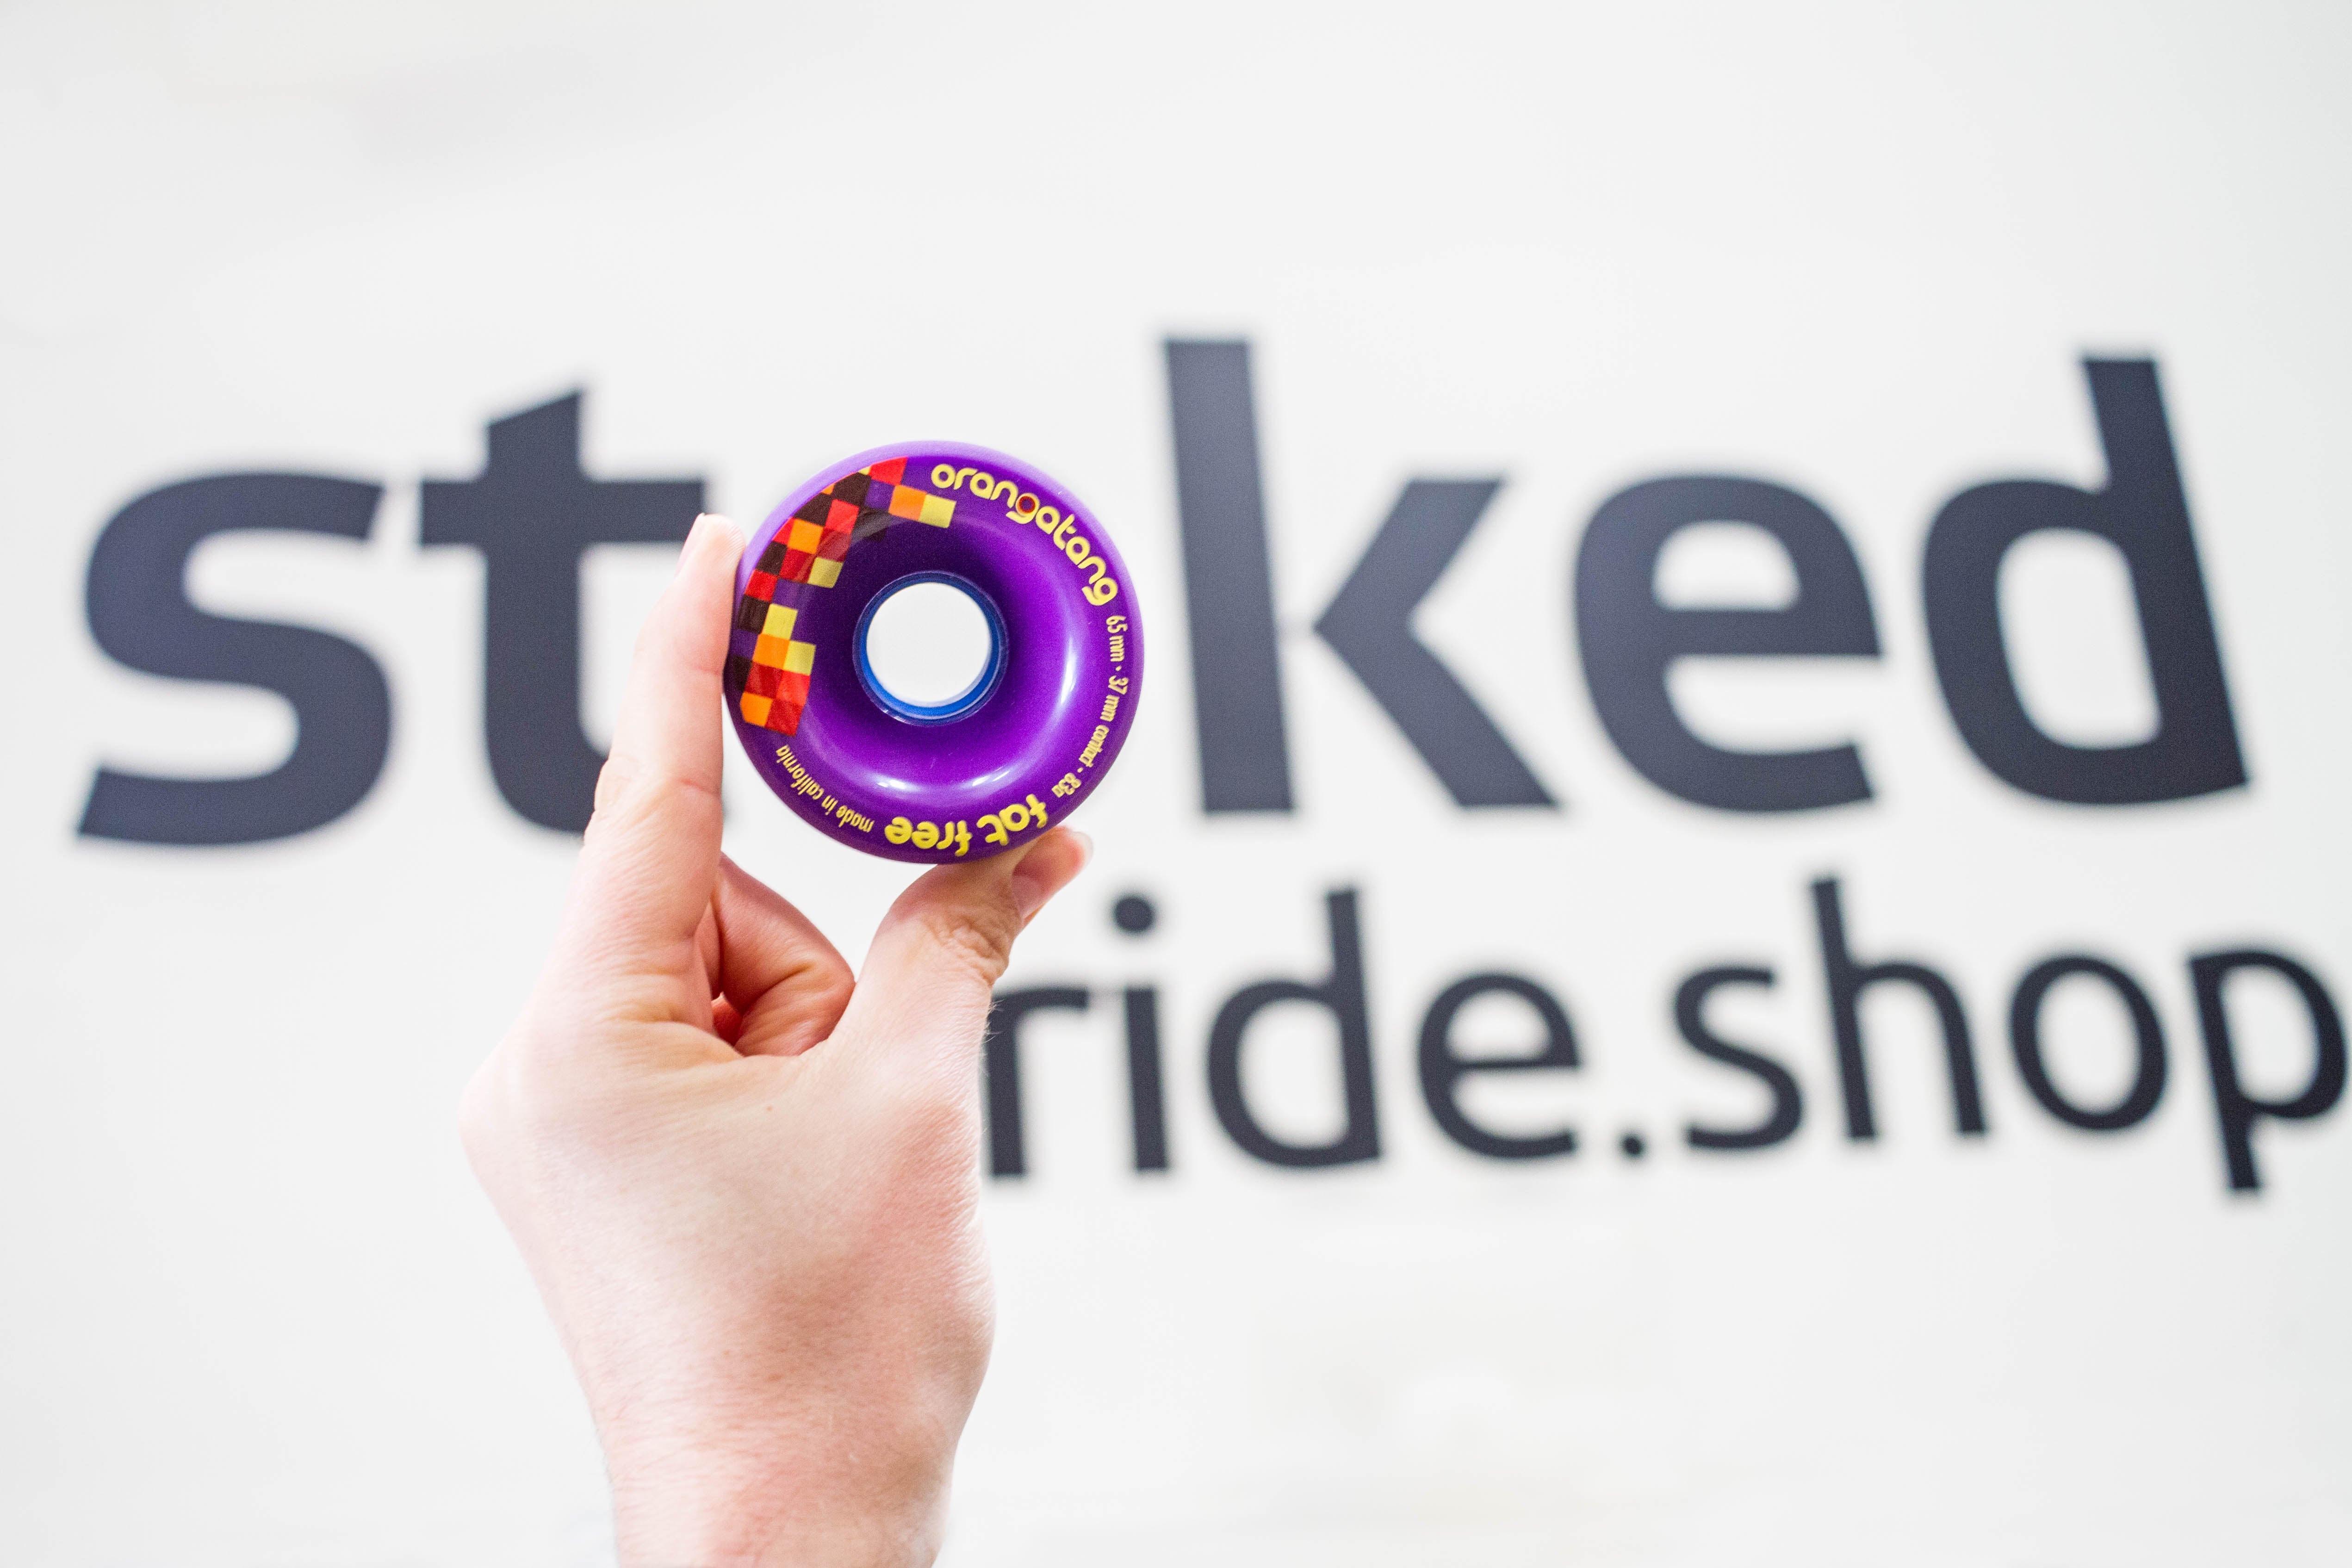 Stoked Ride Shop Skate shop in Torrance has Fat Free Wheels!